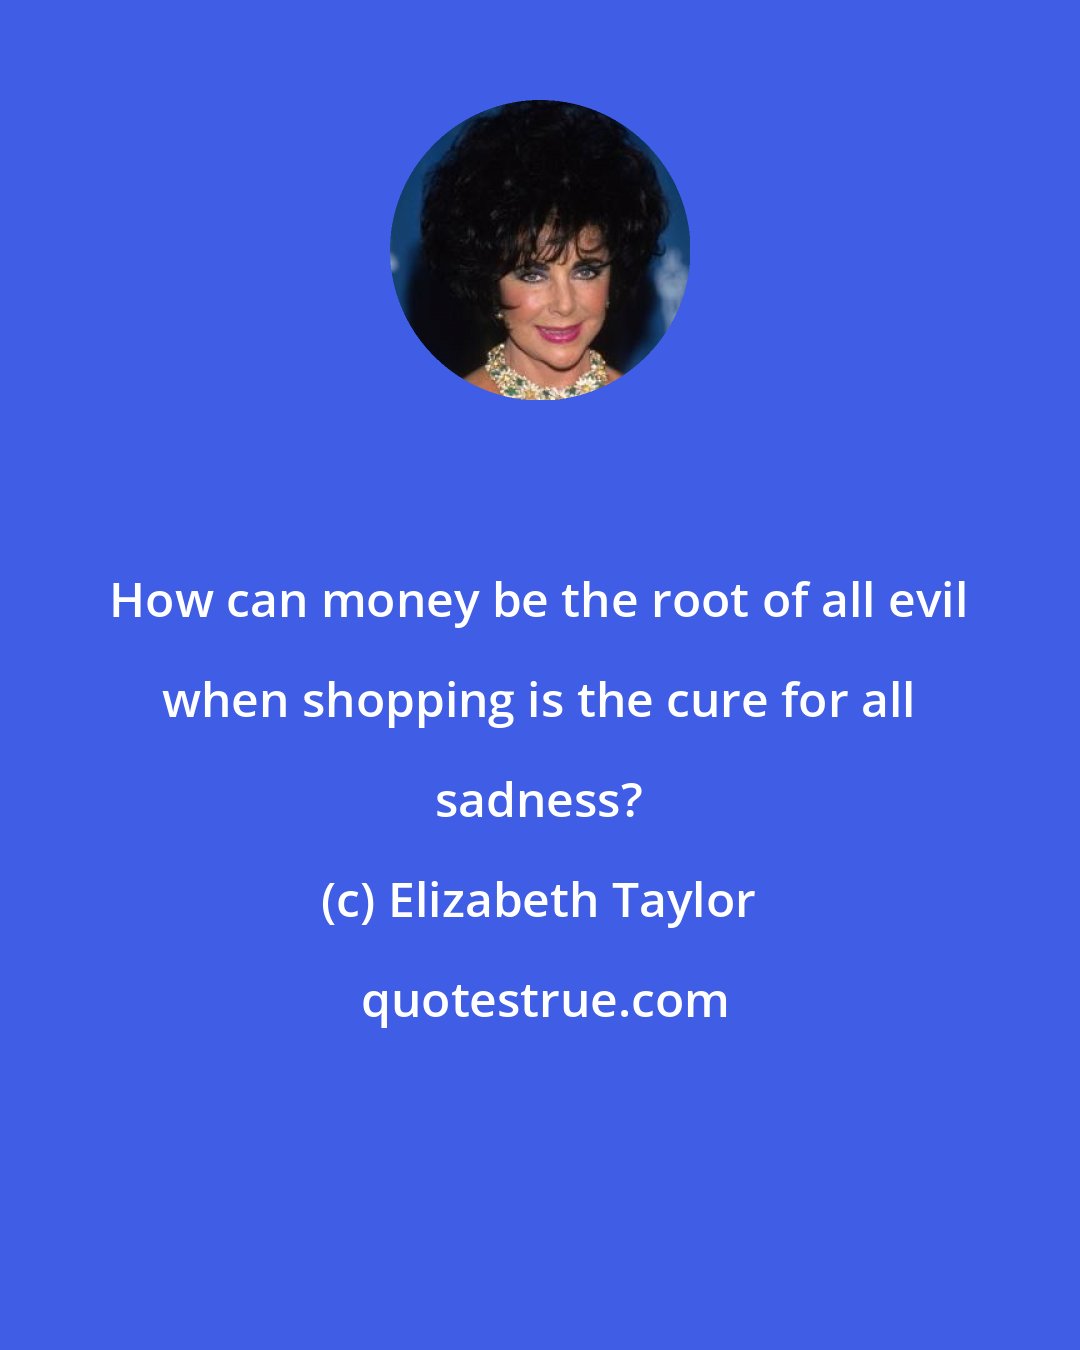 Elizabeth Taylor: How can money be the root of all evil when shopping is the cure for all sadness?